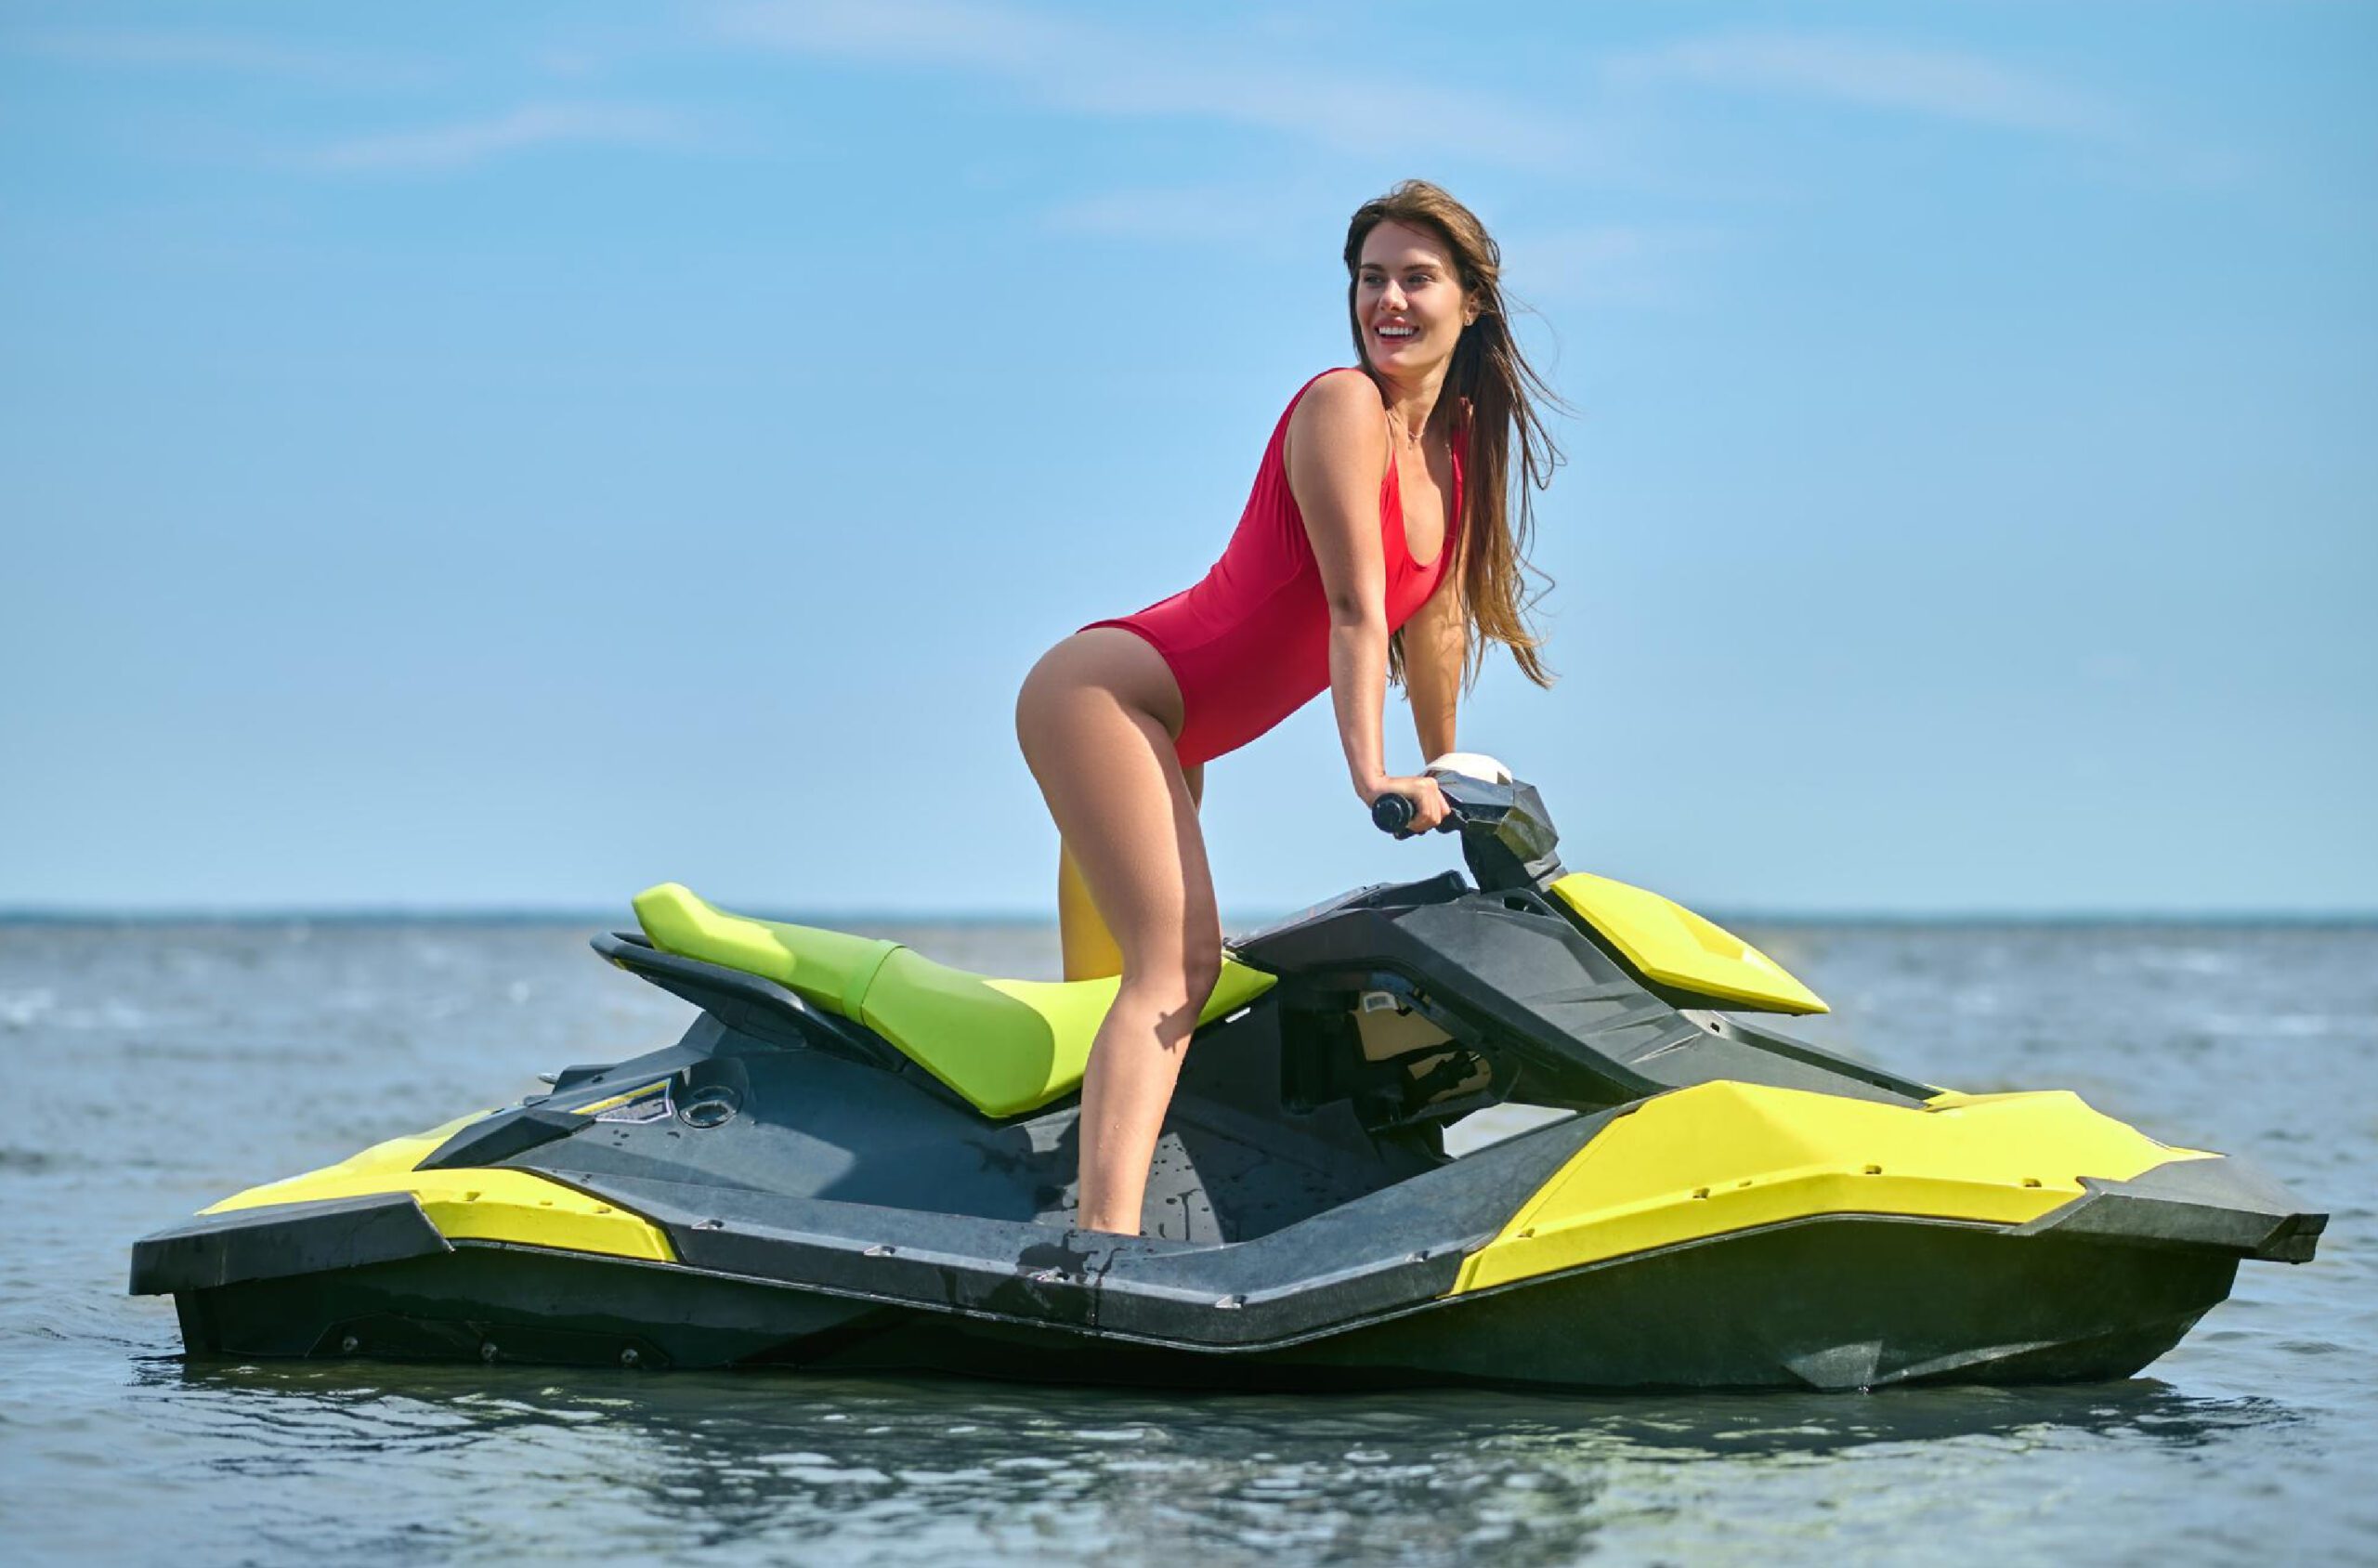 A girl getting ready to enjoy the adrenaline rush with jet ski ride in Dubai